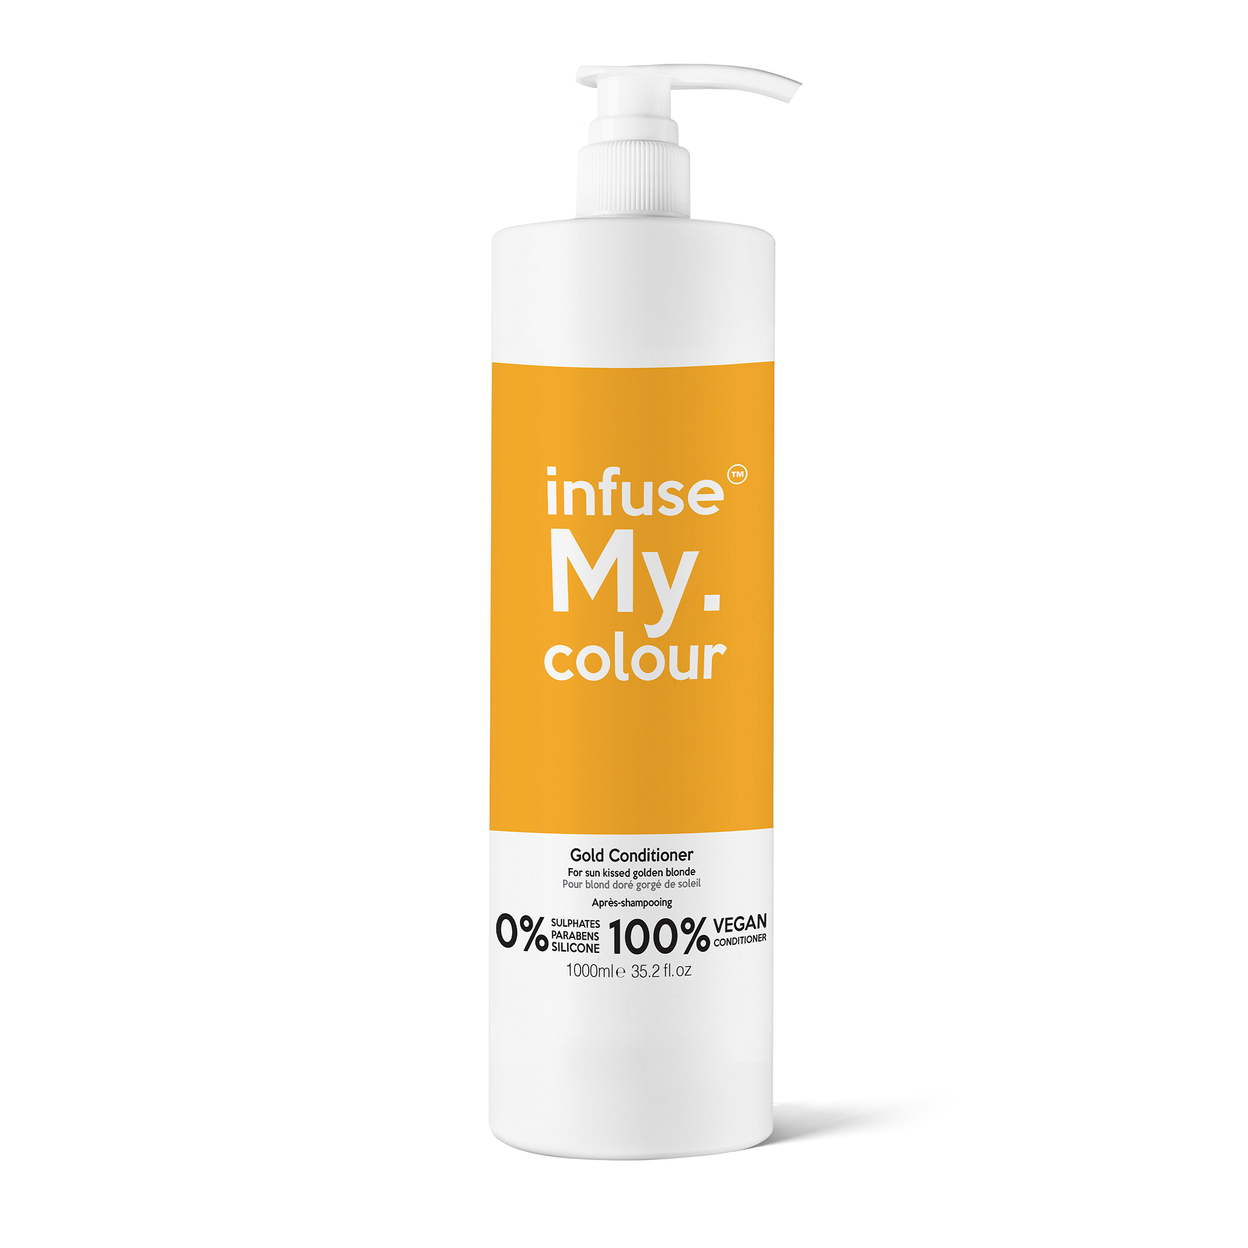 Infuse My Colour Gold Conditioner 35.2 Oz